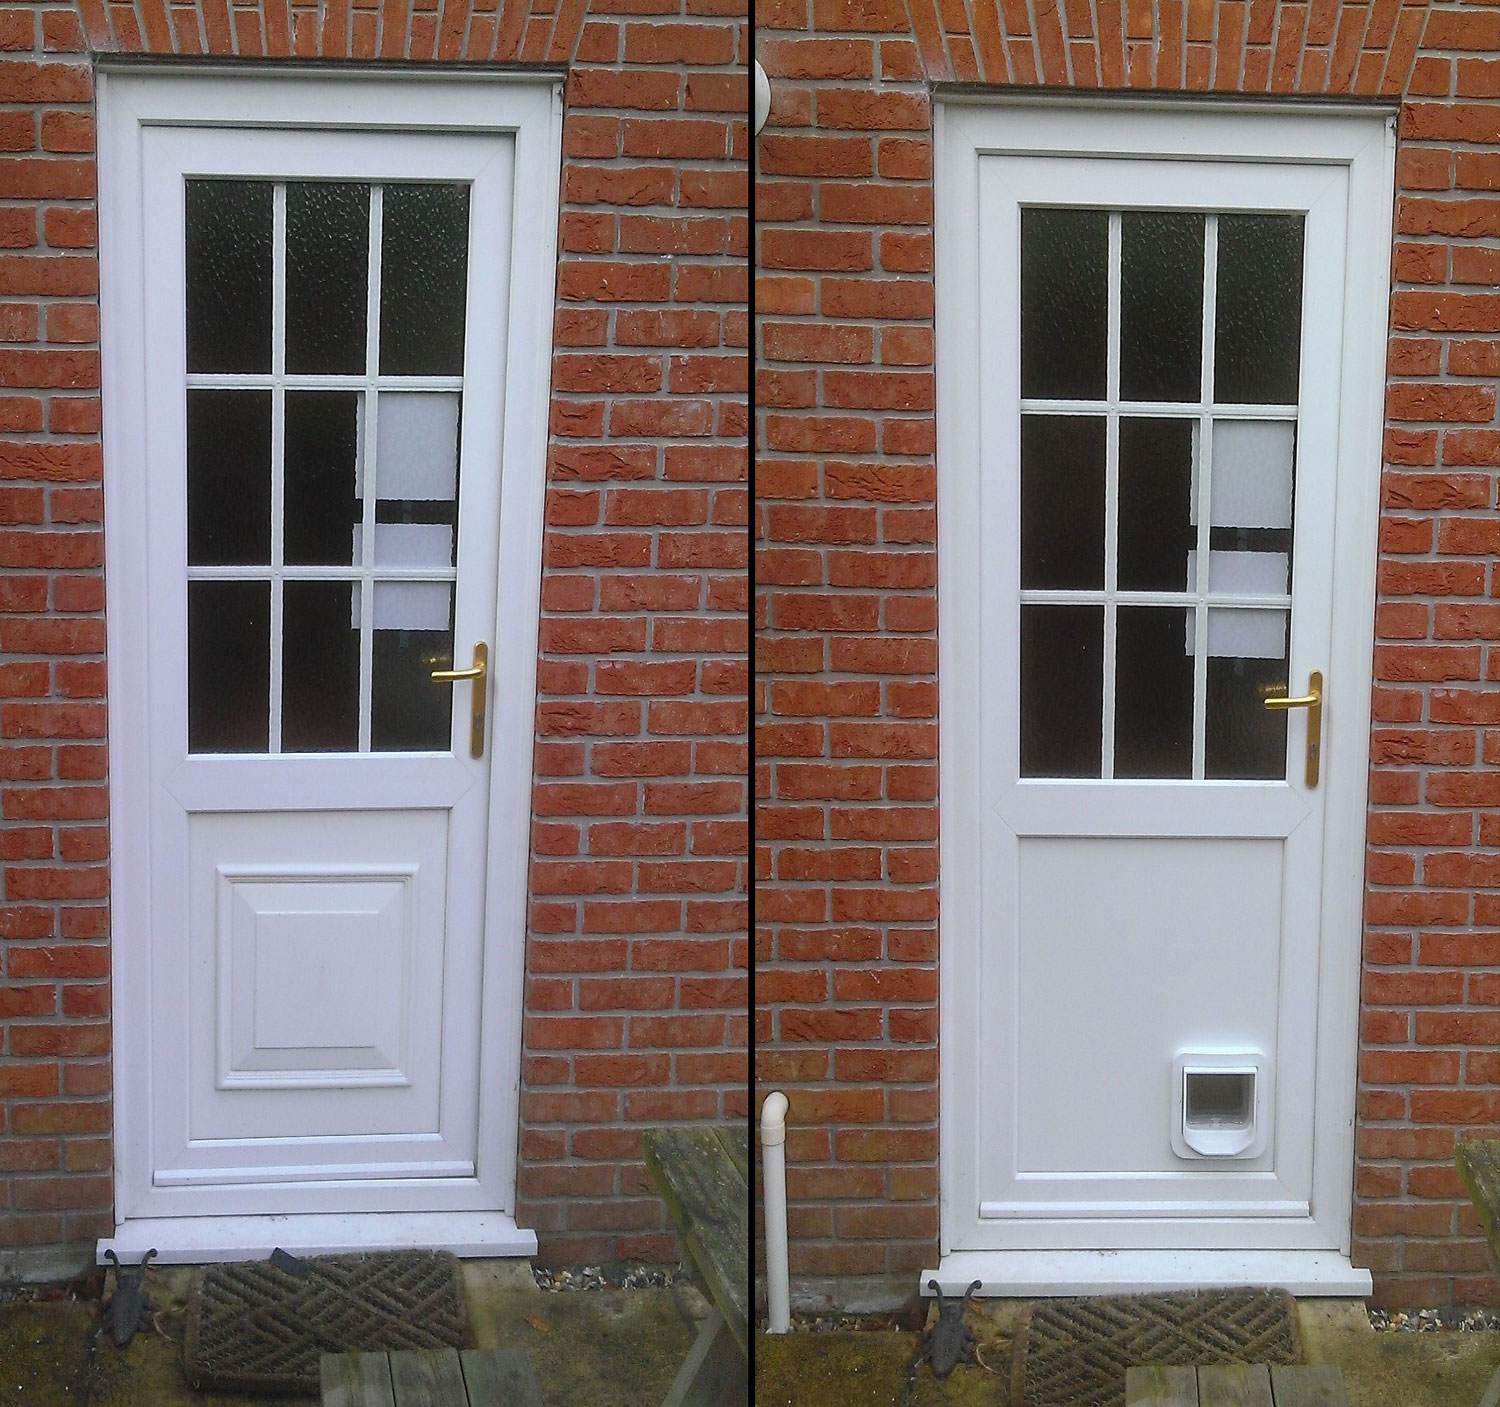 Installing a cat flap into an existing door. S&C Window Repairs can help